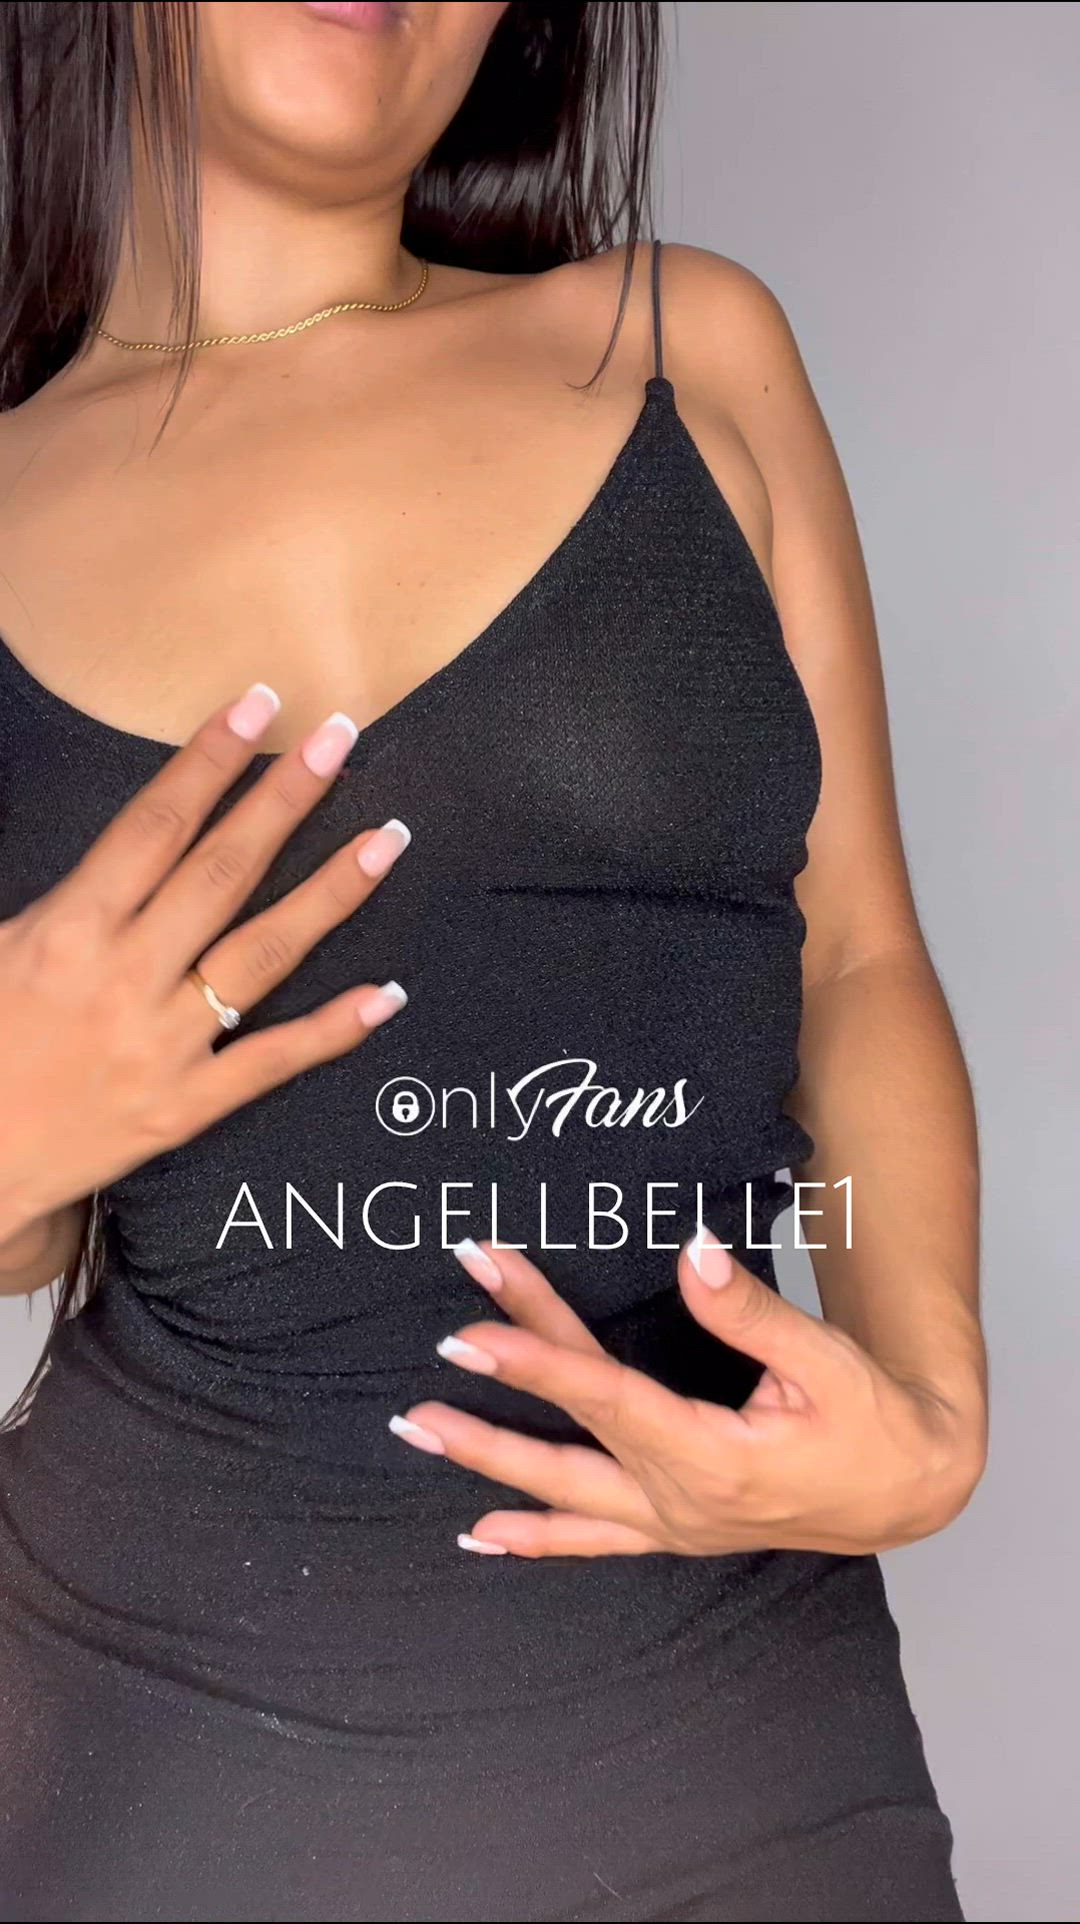 Natural Tits porn video with onlyfans model bigassangellbelle <strong>@angellbelle1</strong>